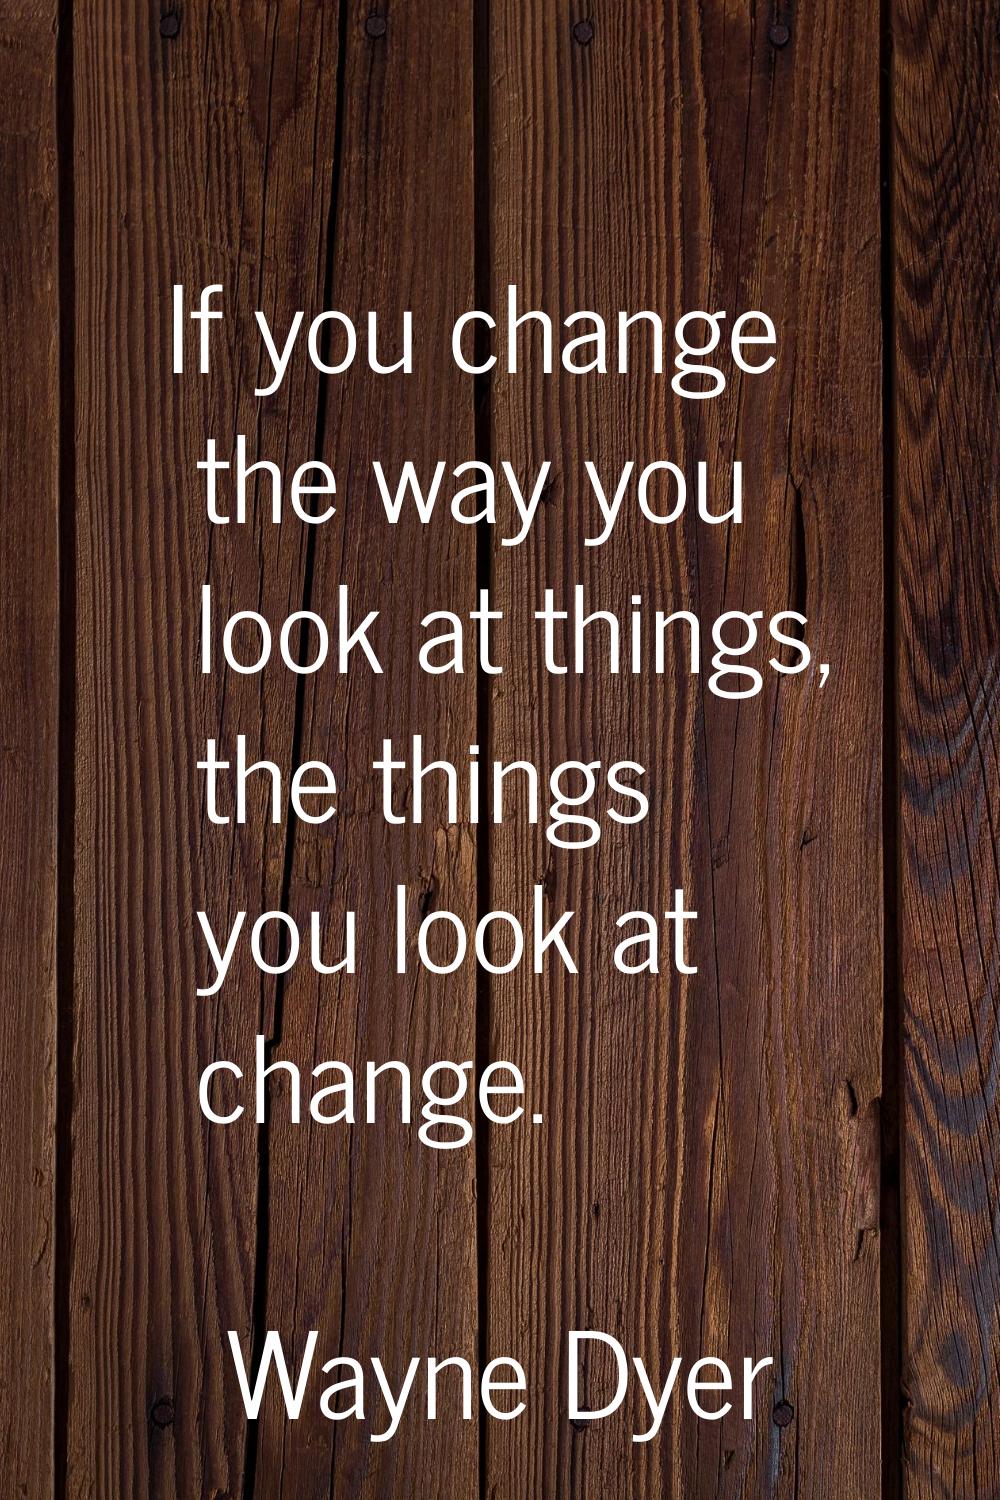 If you change the way you look at things, the things you look at change.